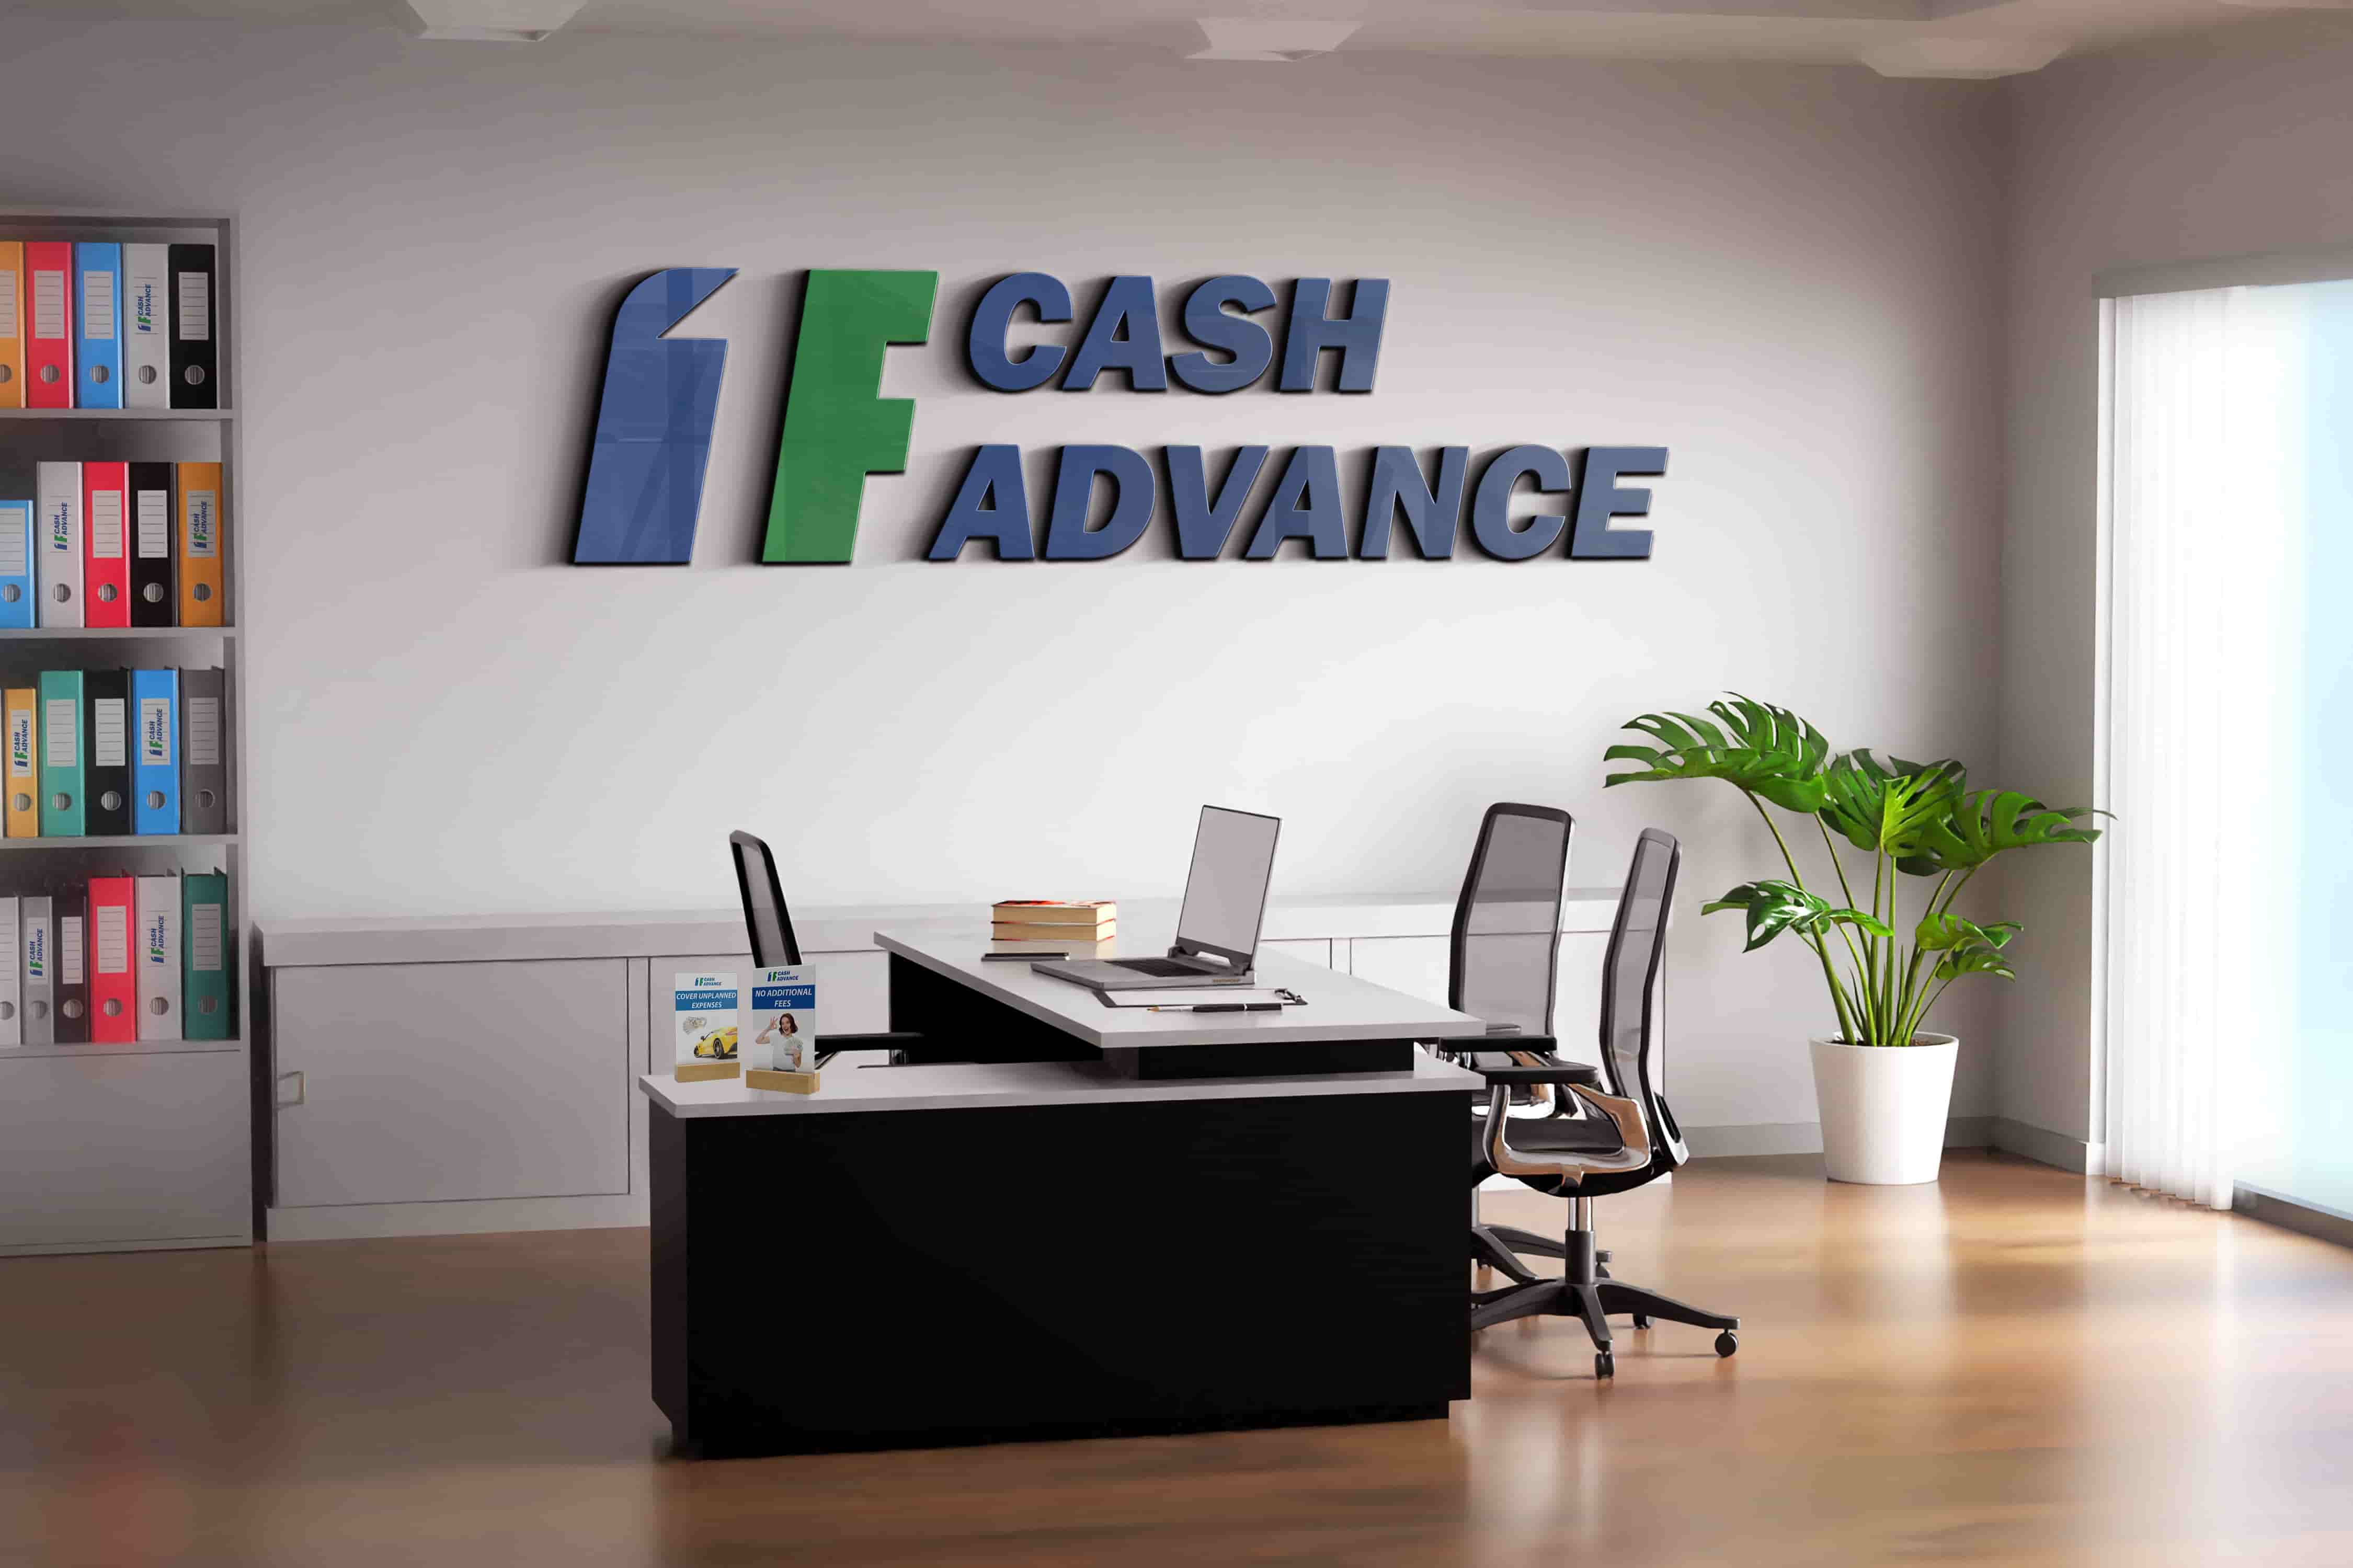 1F Cash Advance payday loans in SD